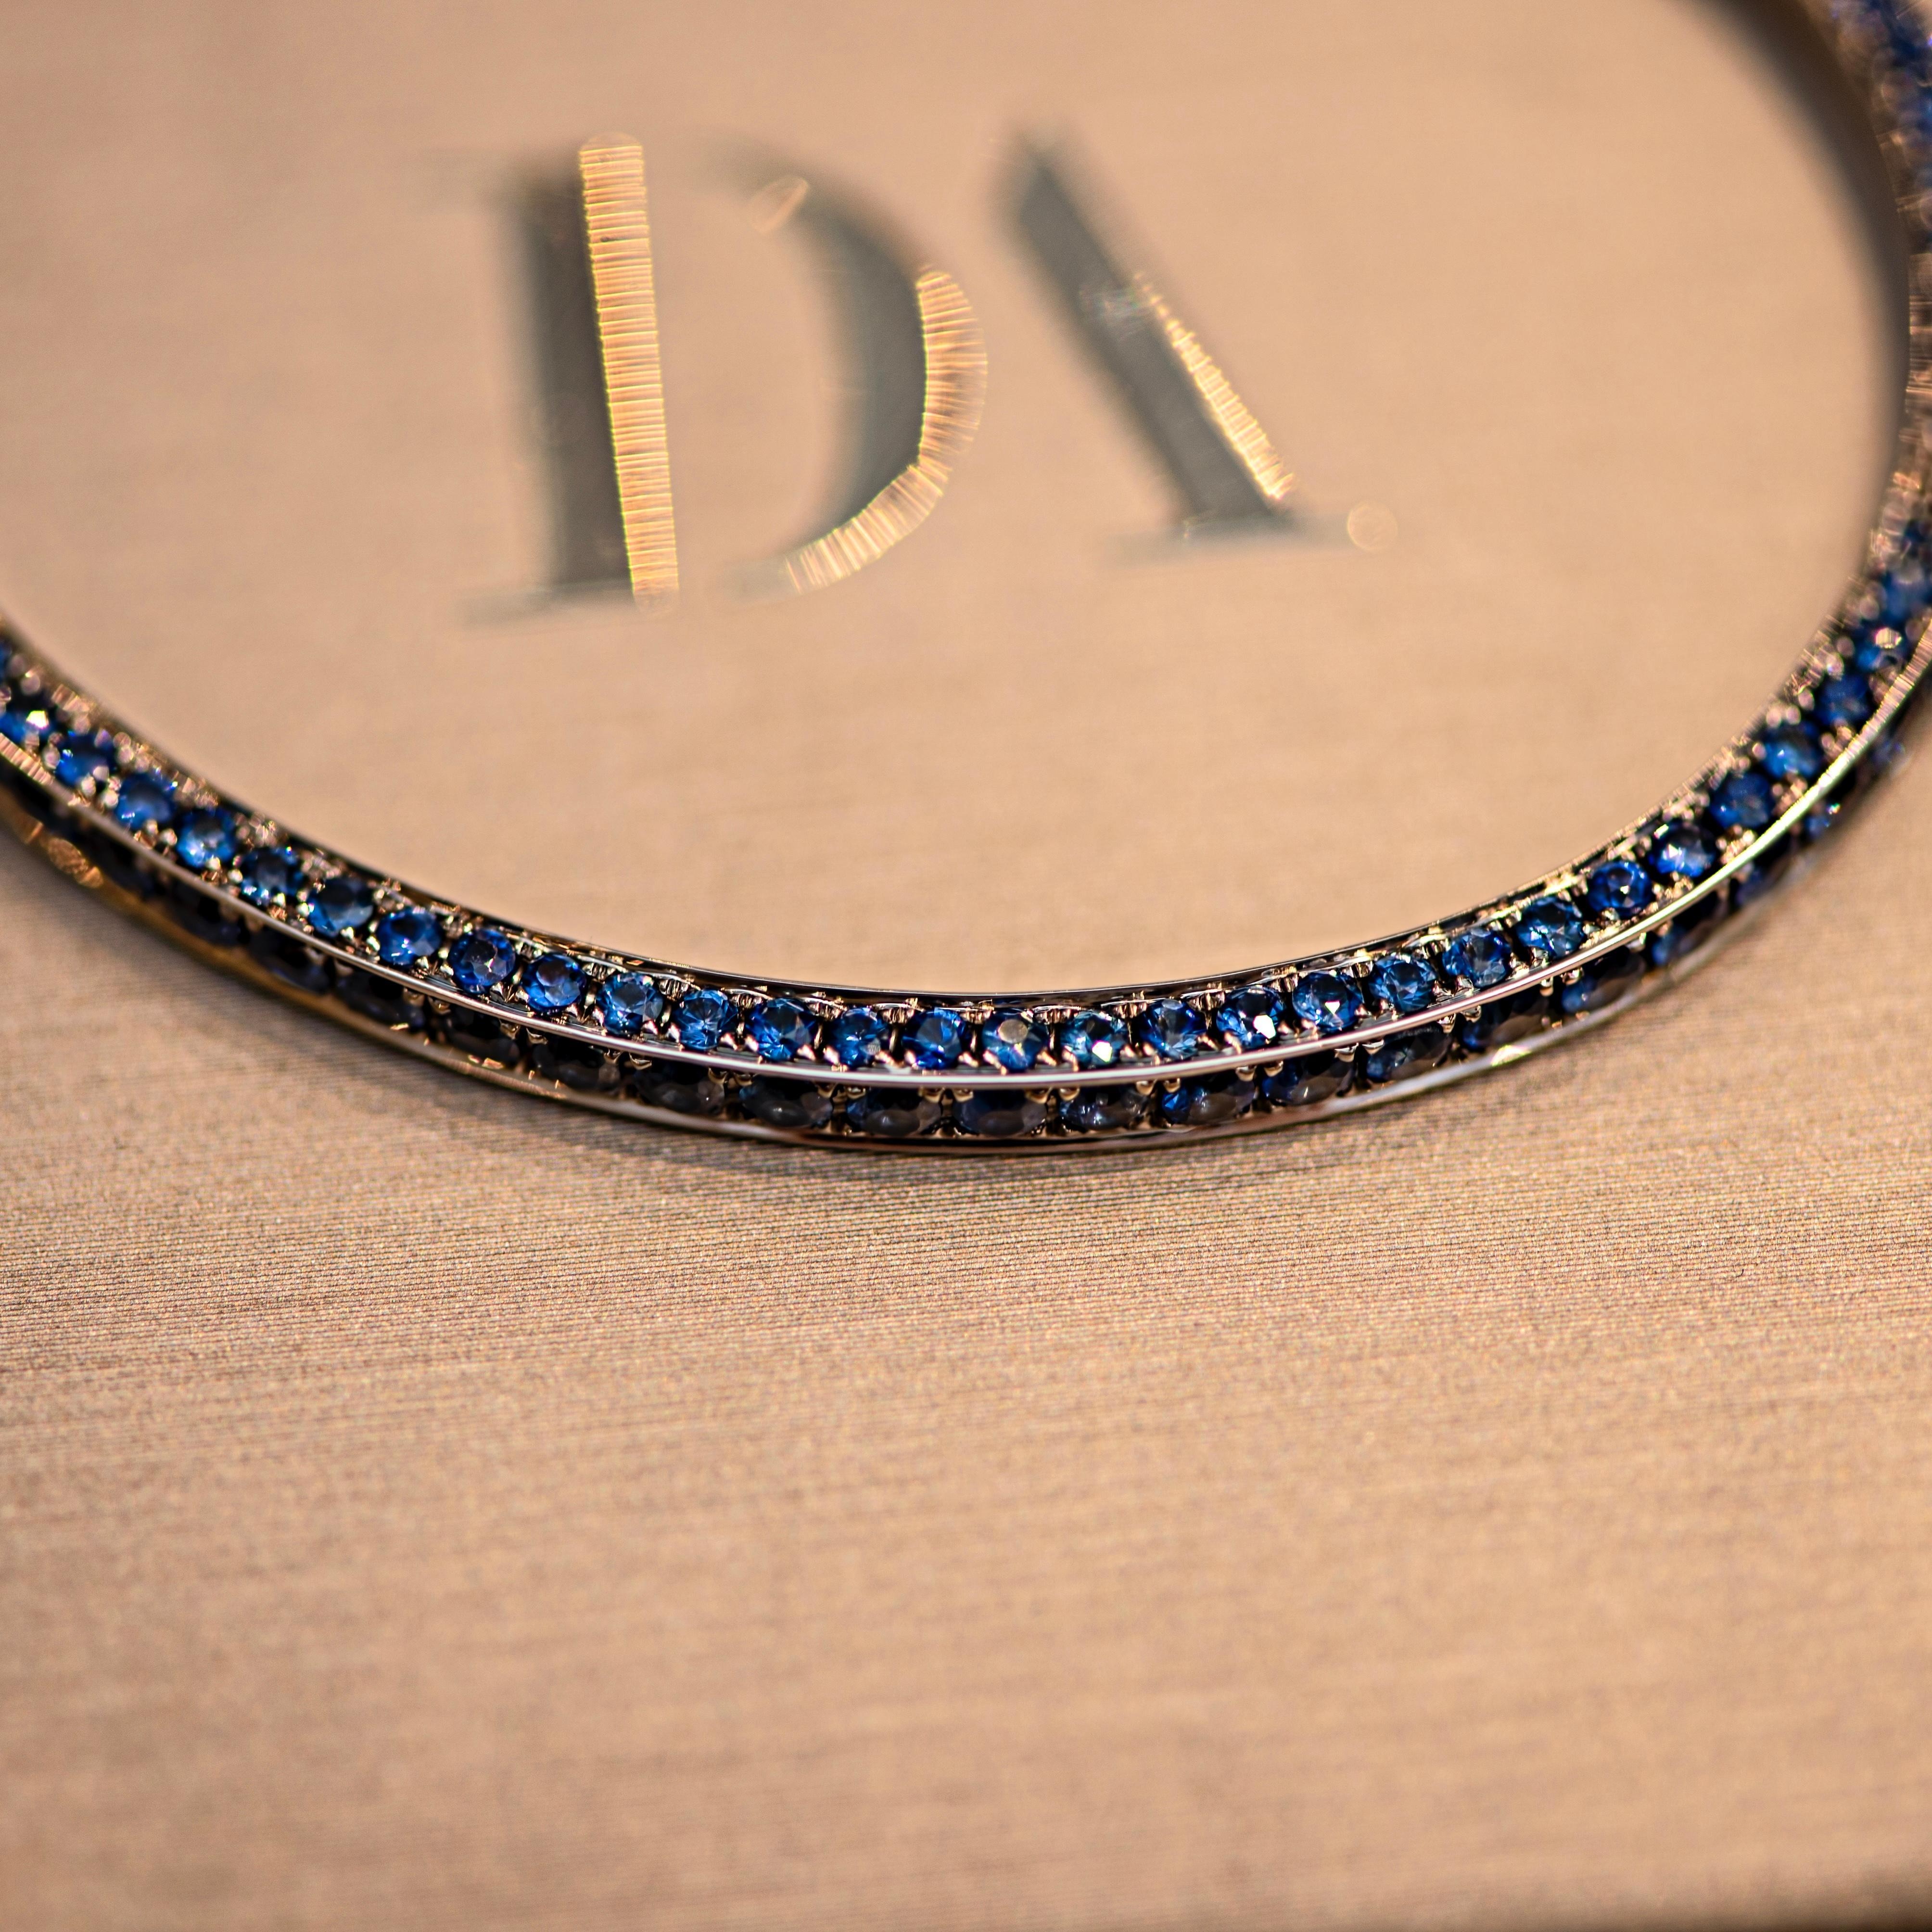 Do you like bangles? If yes, we have one very nice and airy option for you
Delicate elegant bangle with small intense blue sapphires in white gold are looking very elegant and stylish on the hand
This bracelet is on stock and ready to become